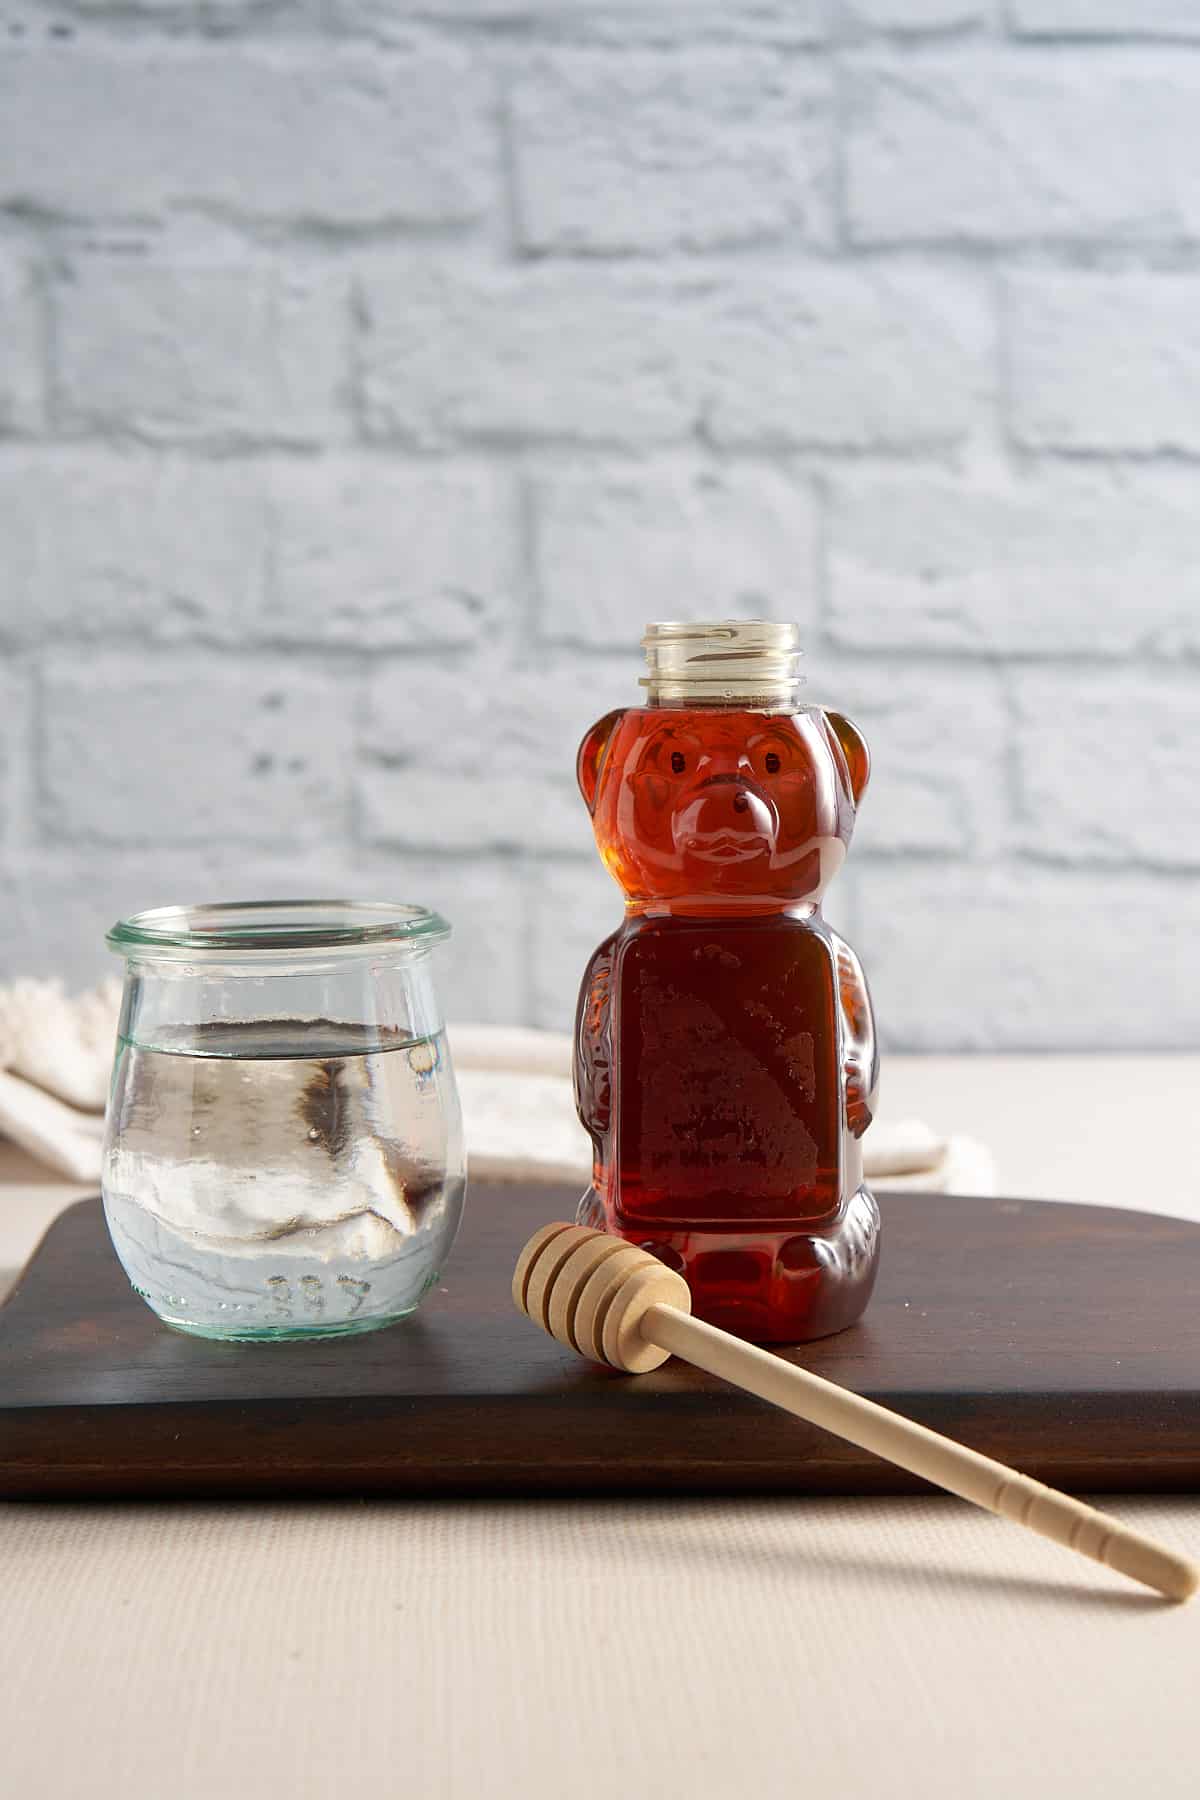 ingredients for honey syrup. the water in a jar and a container of honey